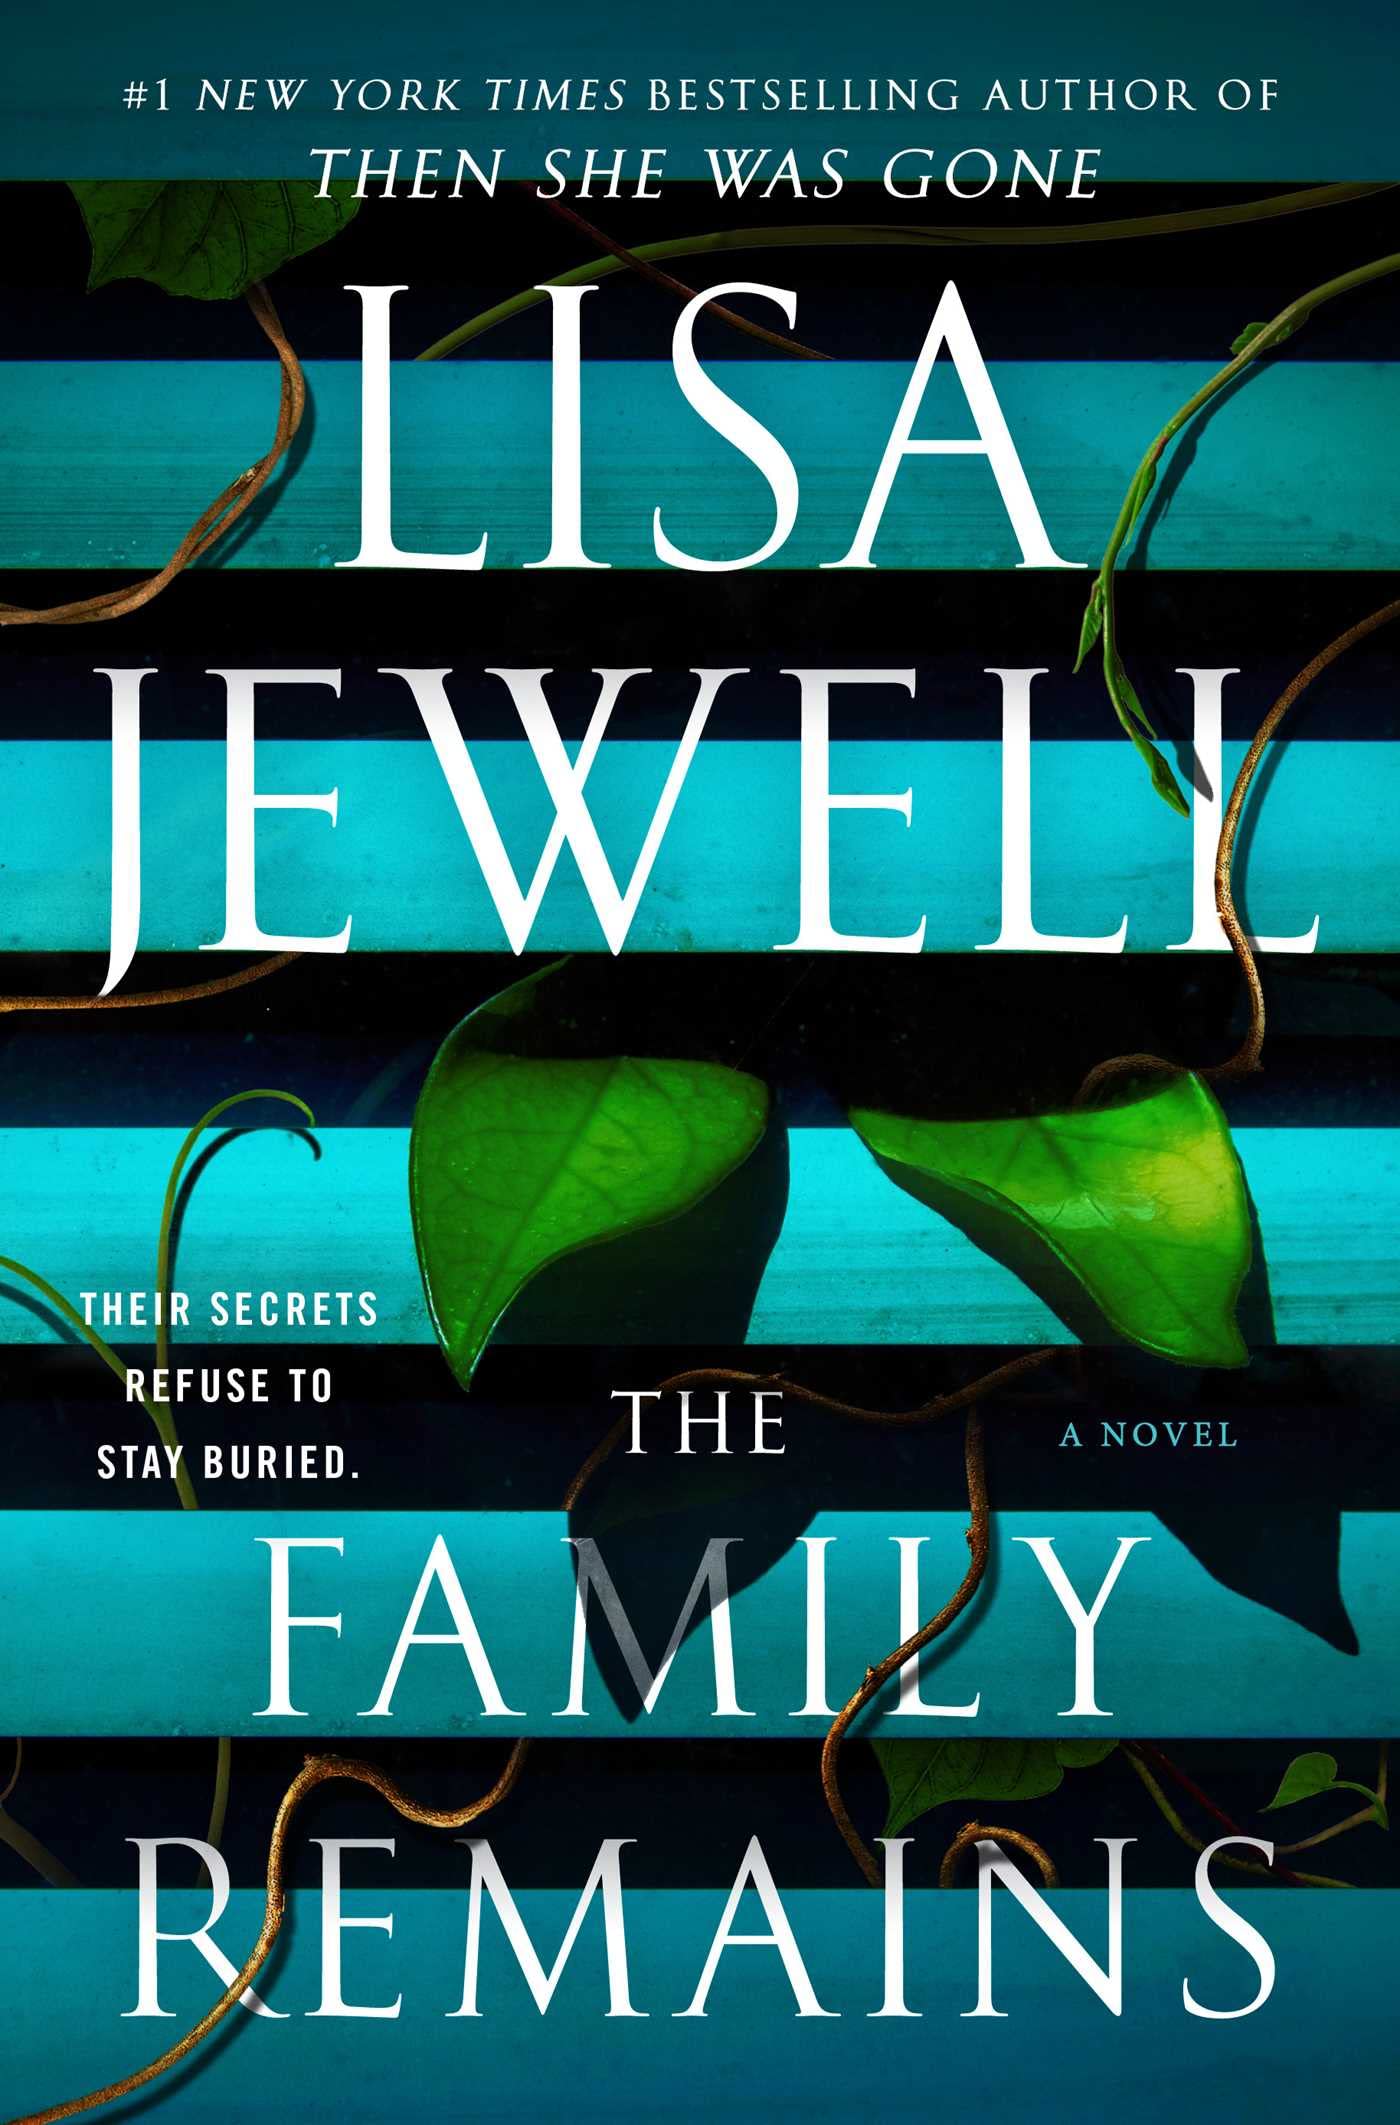 Book Cover image for The Family Remains